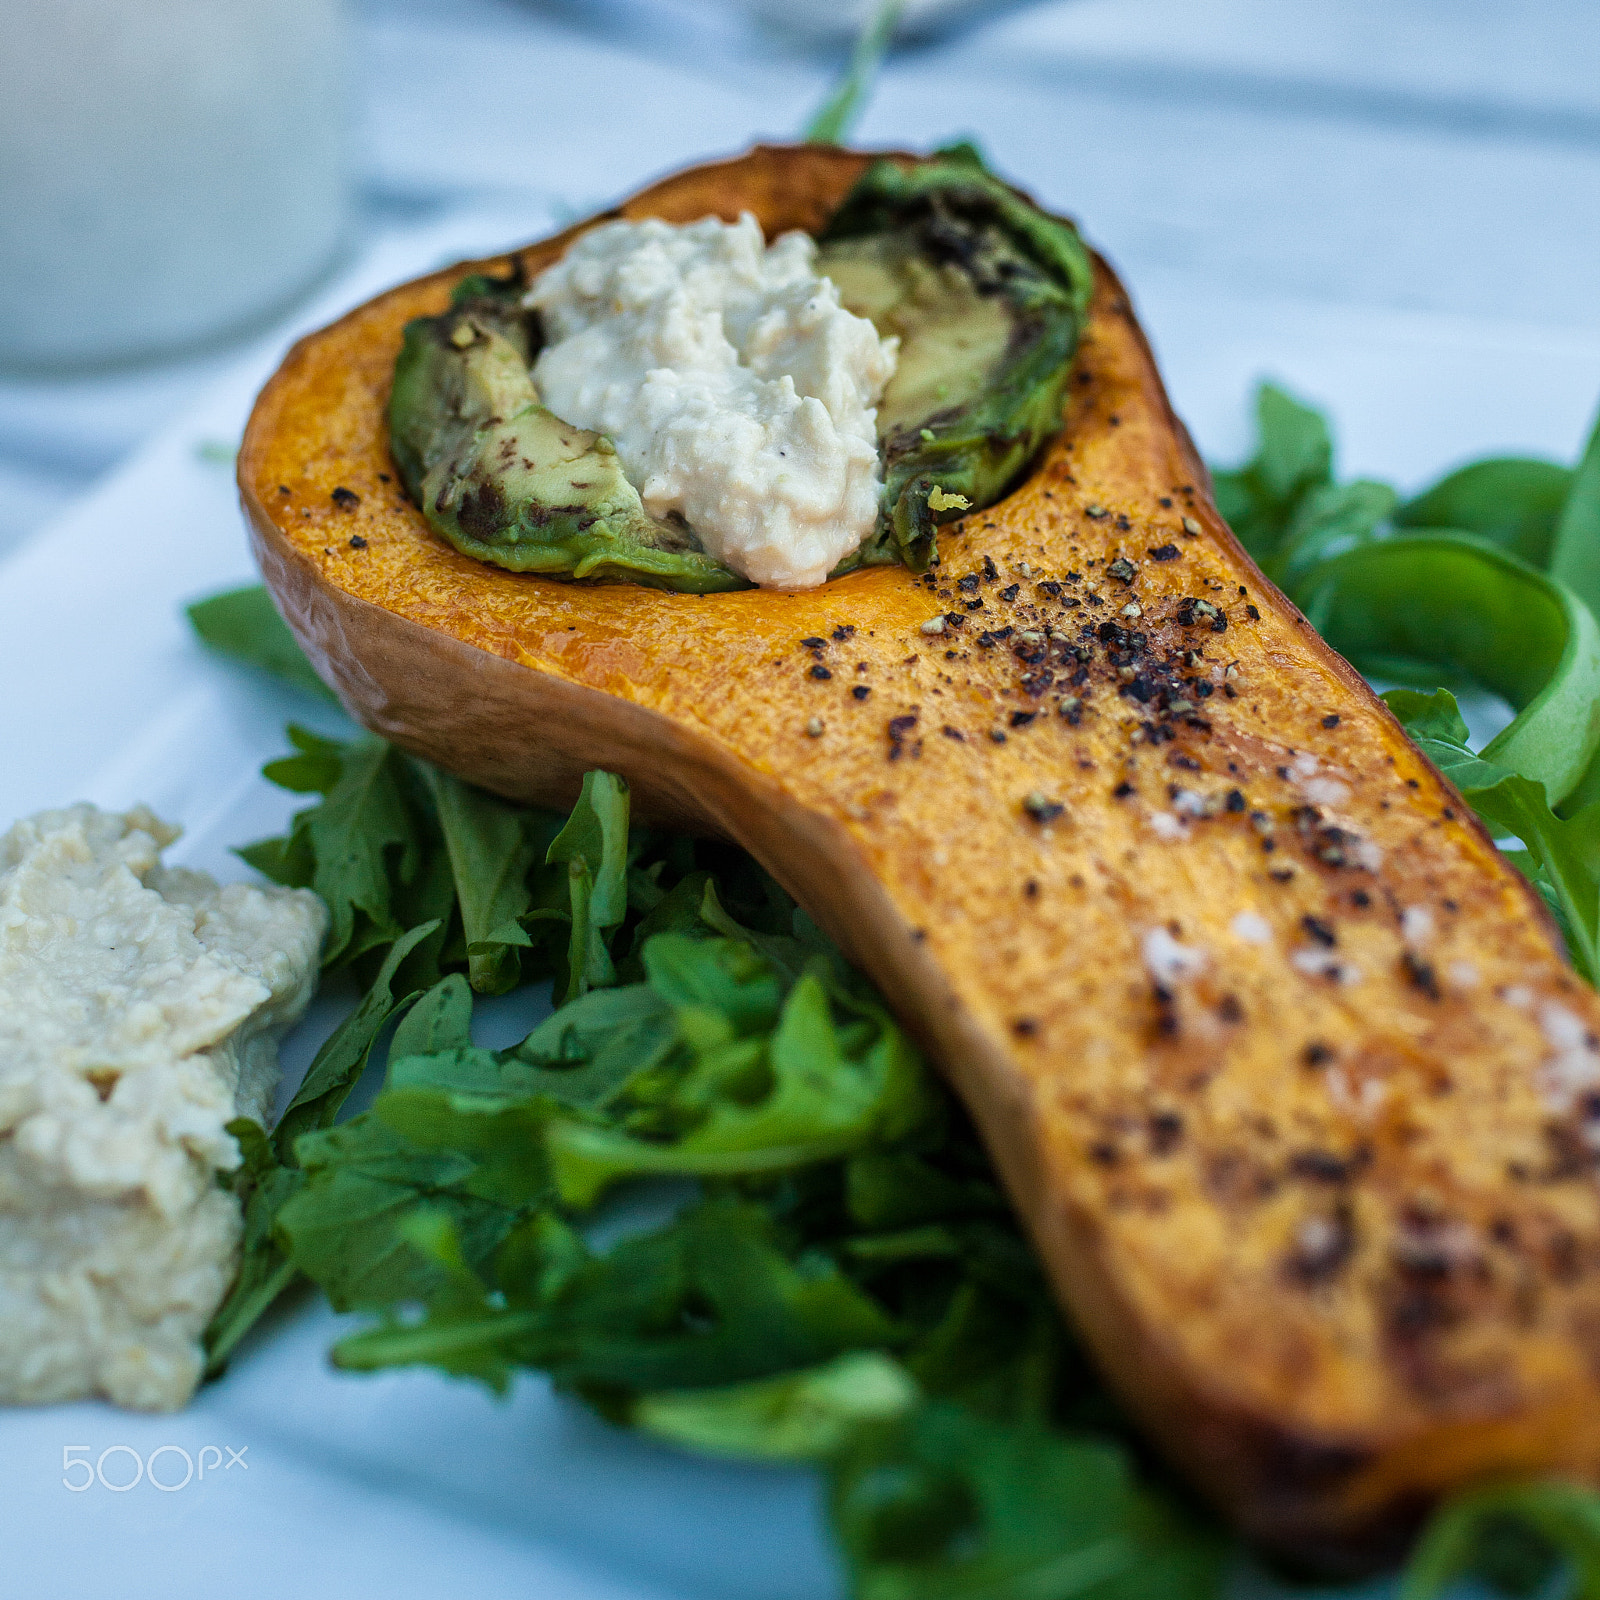 ZEISS Distagon T* 35mm F1.4 sample photo. Roasted squash photography